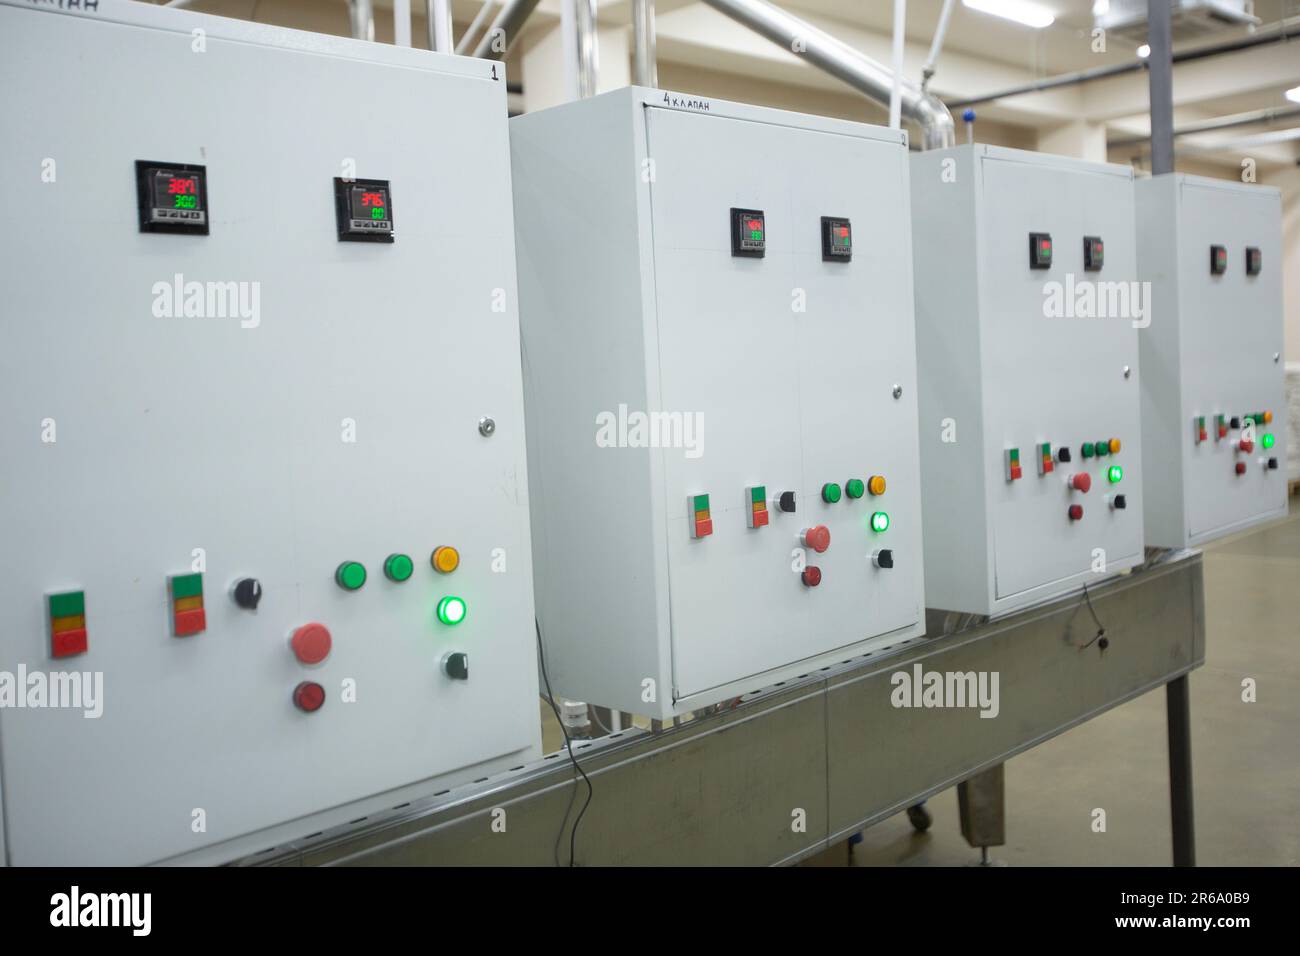 The industrial electrical machines in a factroy Stock Photo